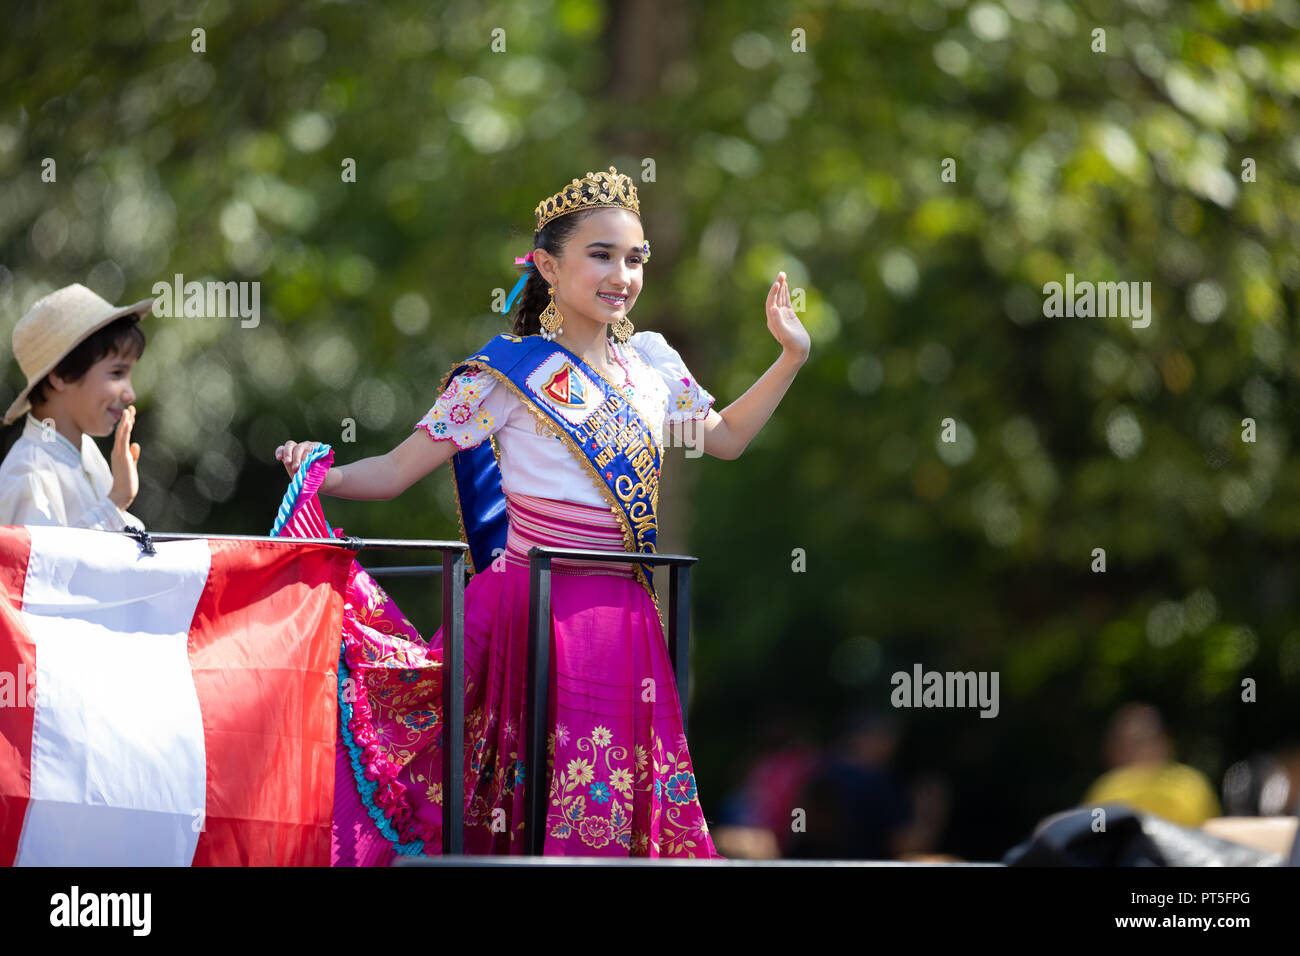 Washington, D.C., USA - September 29, 2018: The Fiesta DC Parade, Panamanian beauty queen wearing traditional clothing going on top of a float down th Stock Photo